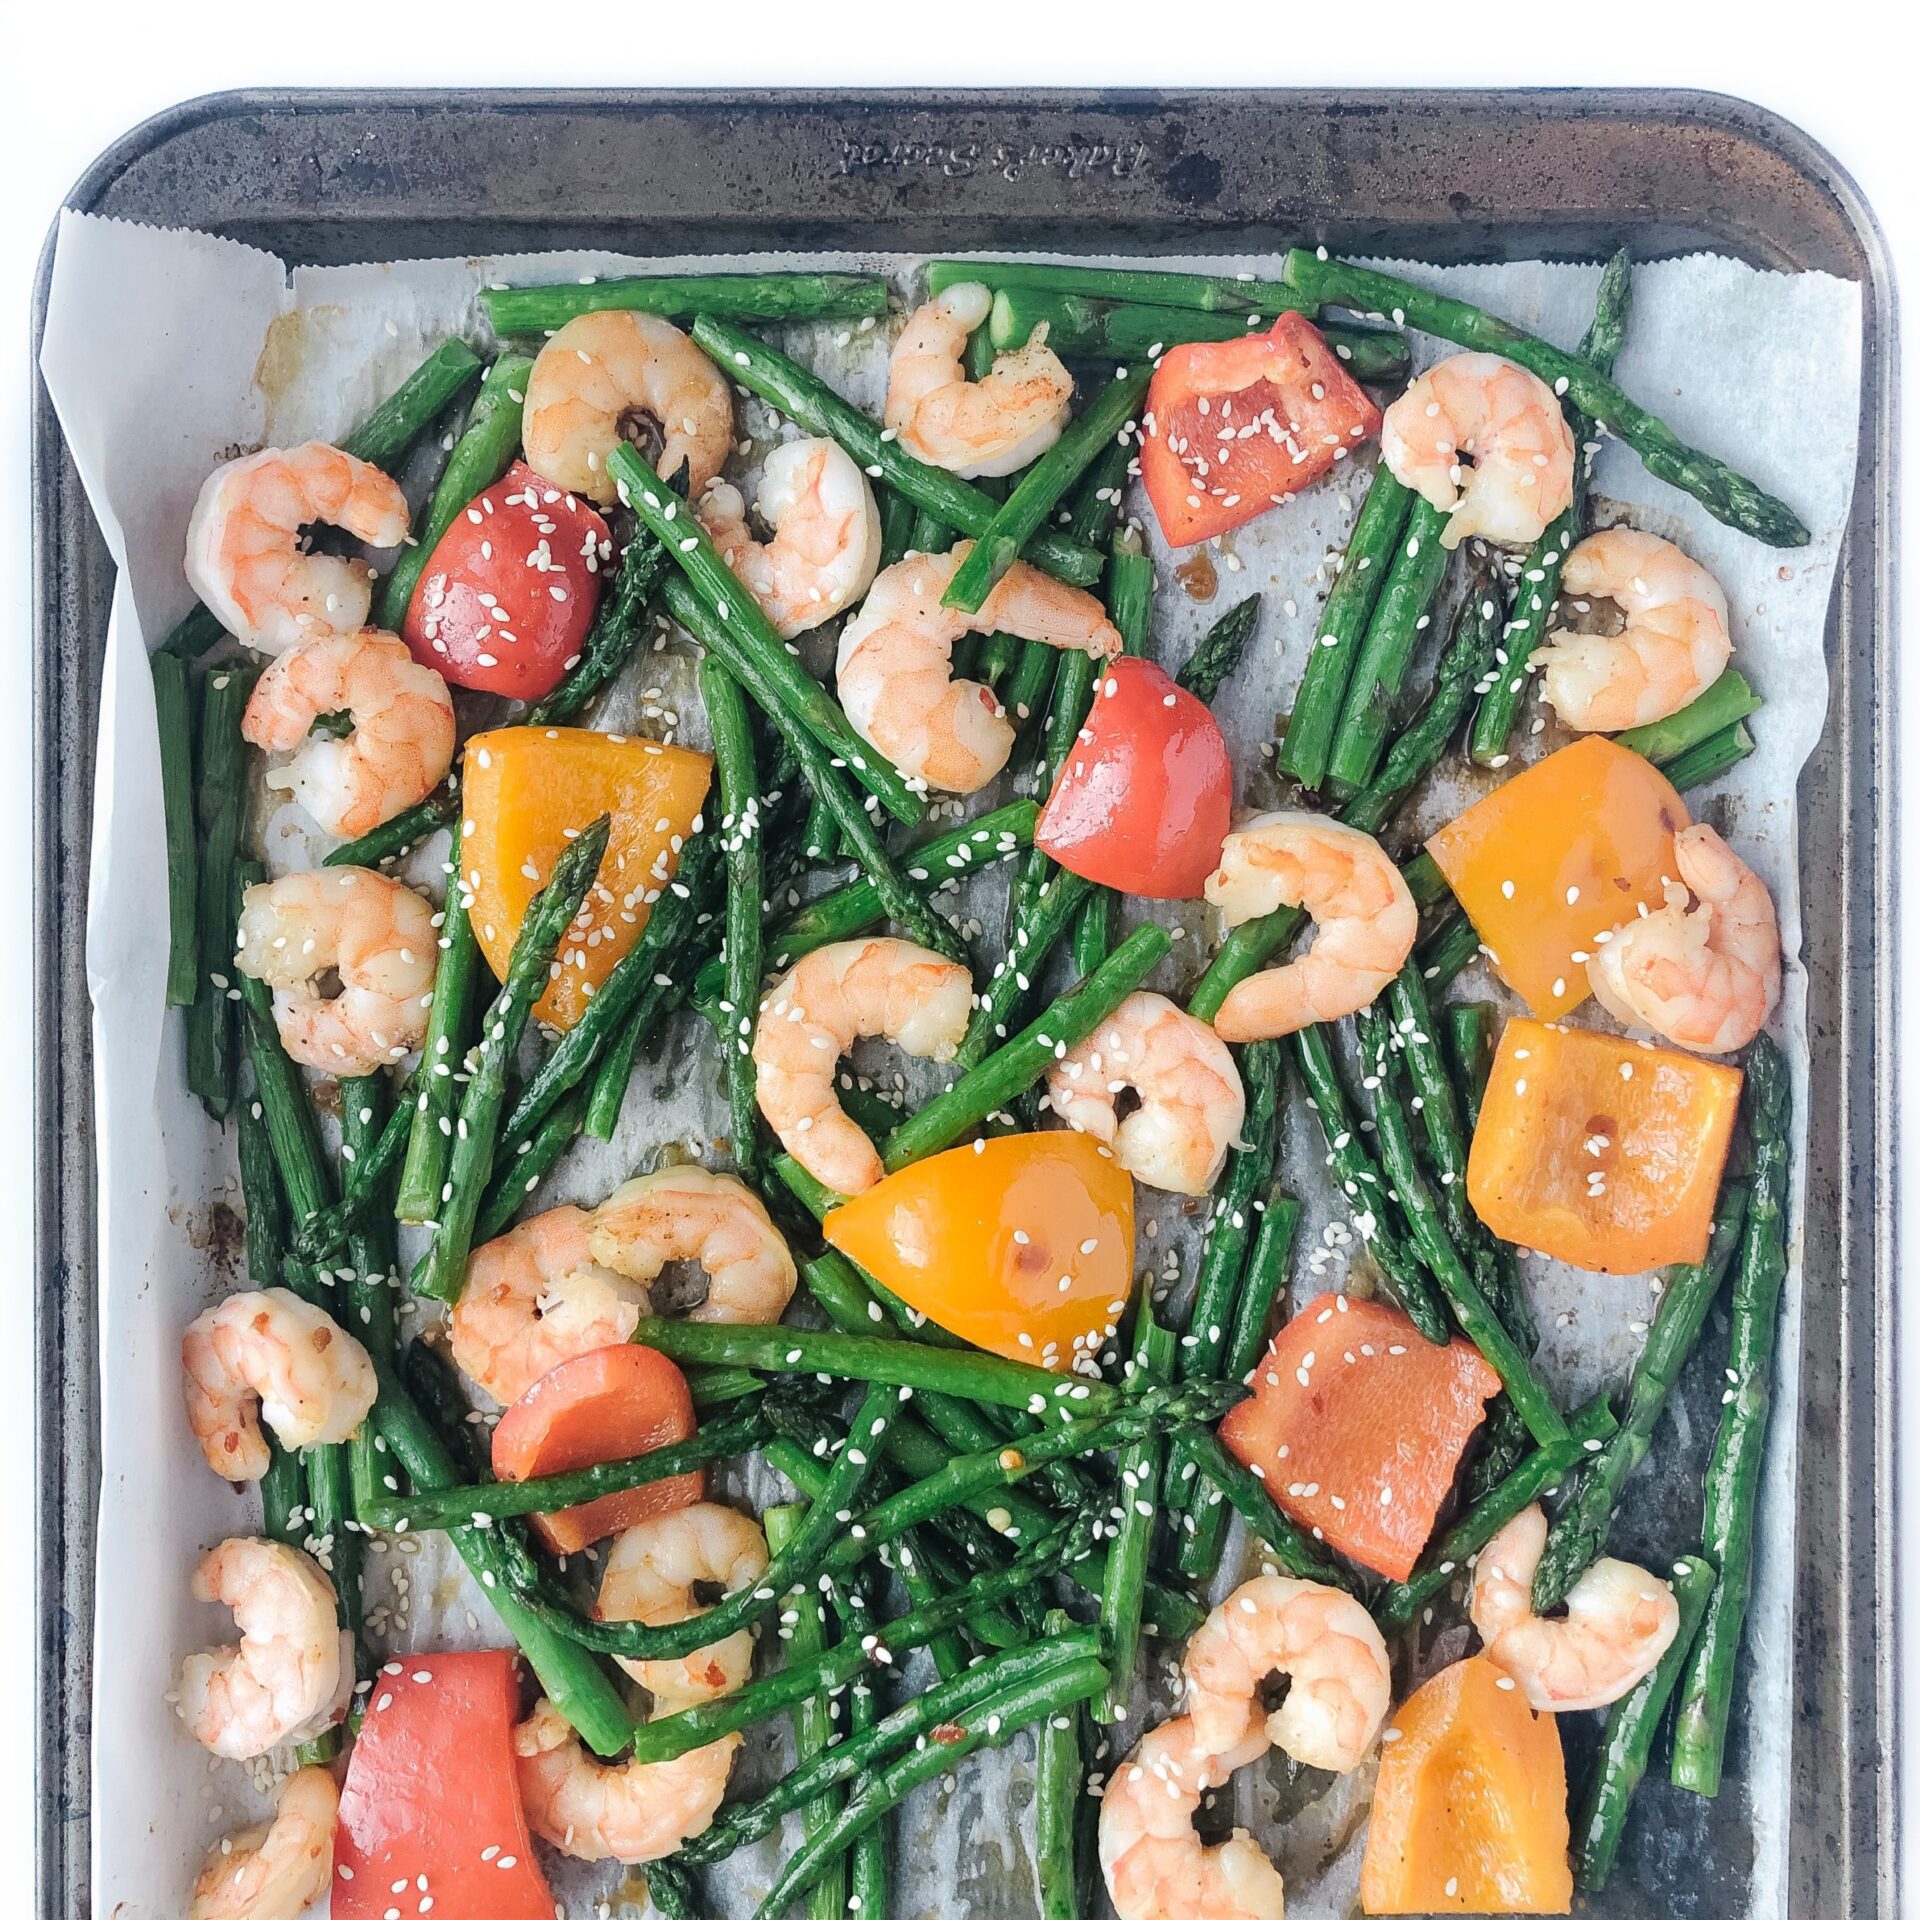 Quick and Healthy Dinner Recipes Using Asparagus